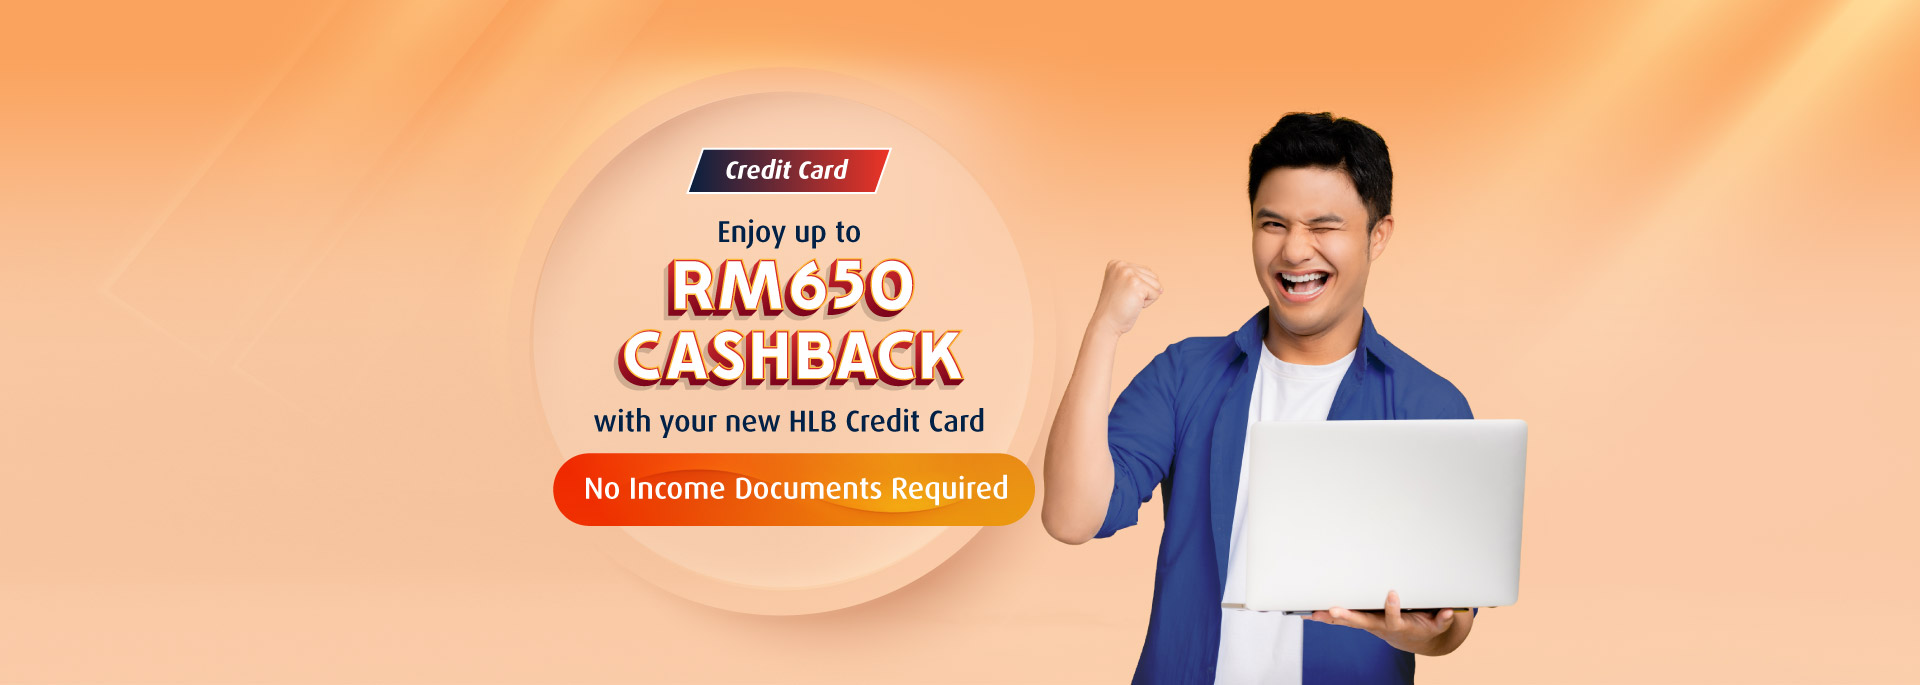 Hop into the new year with a new HLB Credit Card for more cashback. No income documents required!